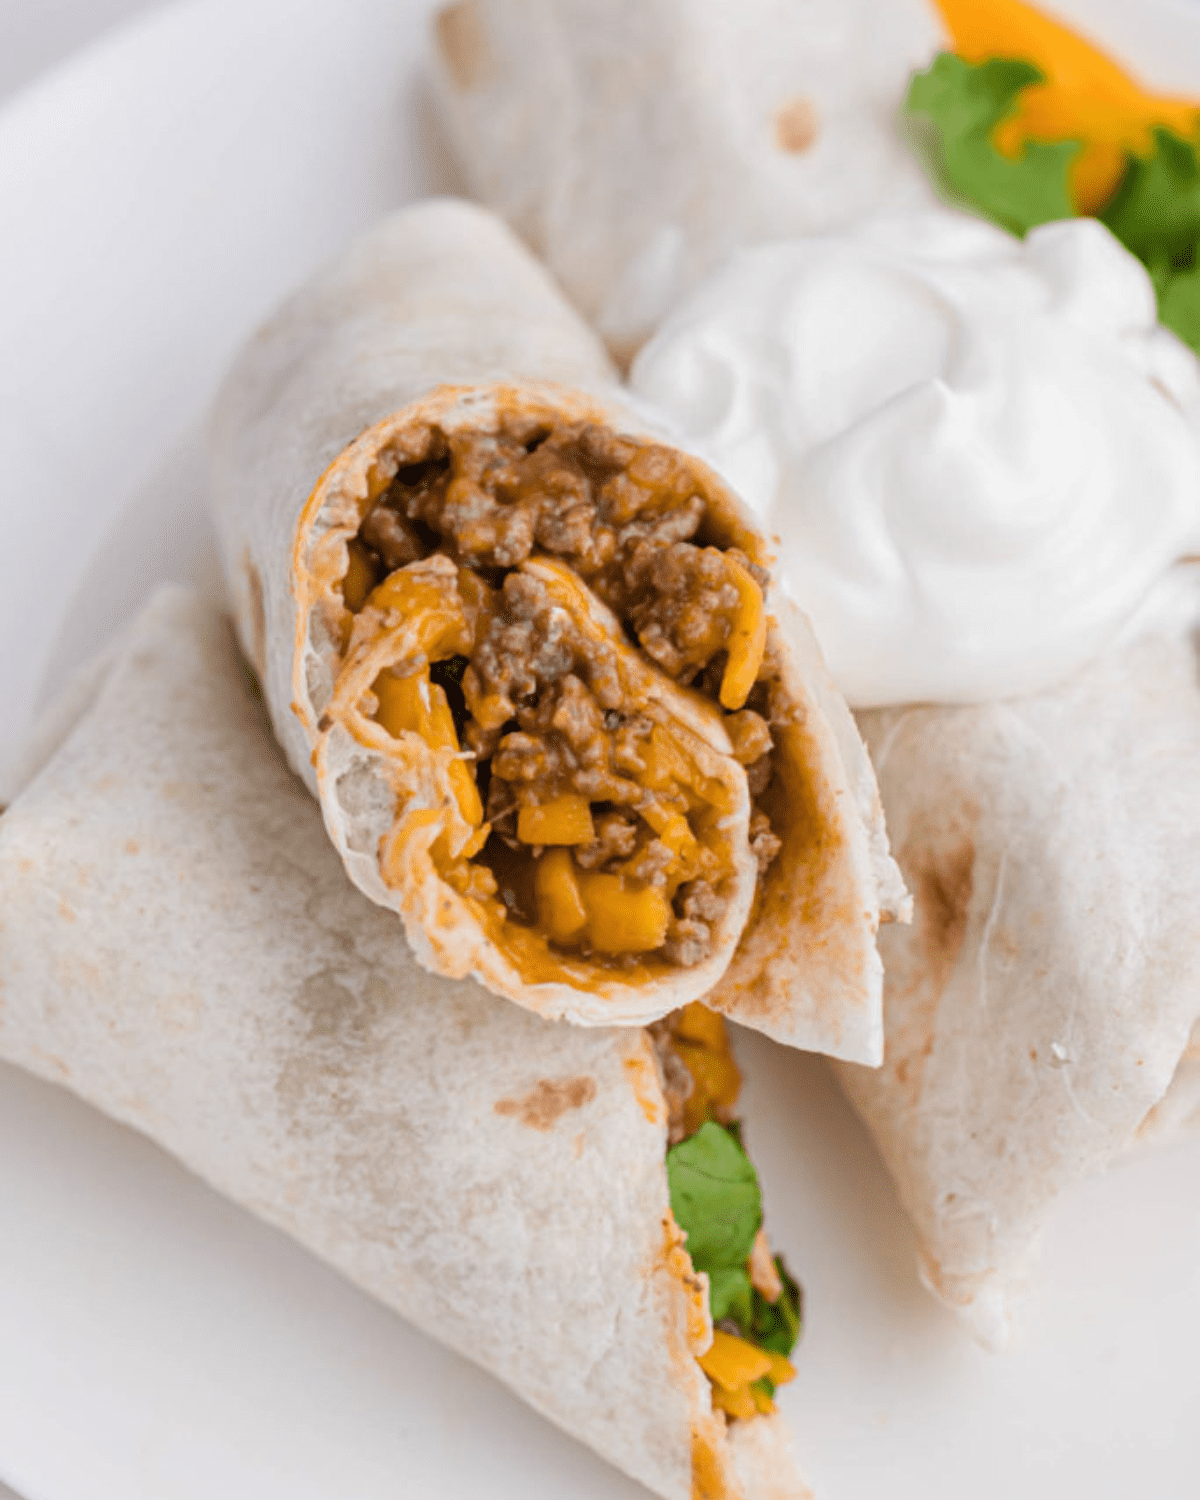 Salsa, cheese and beef burritos